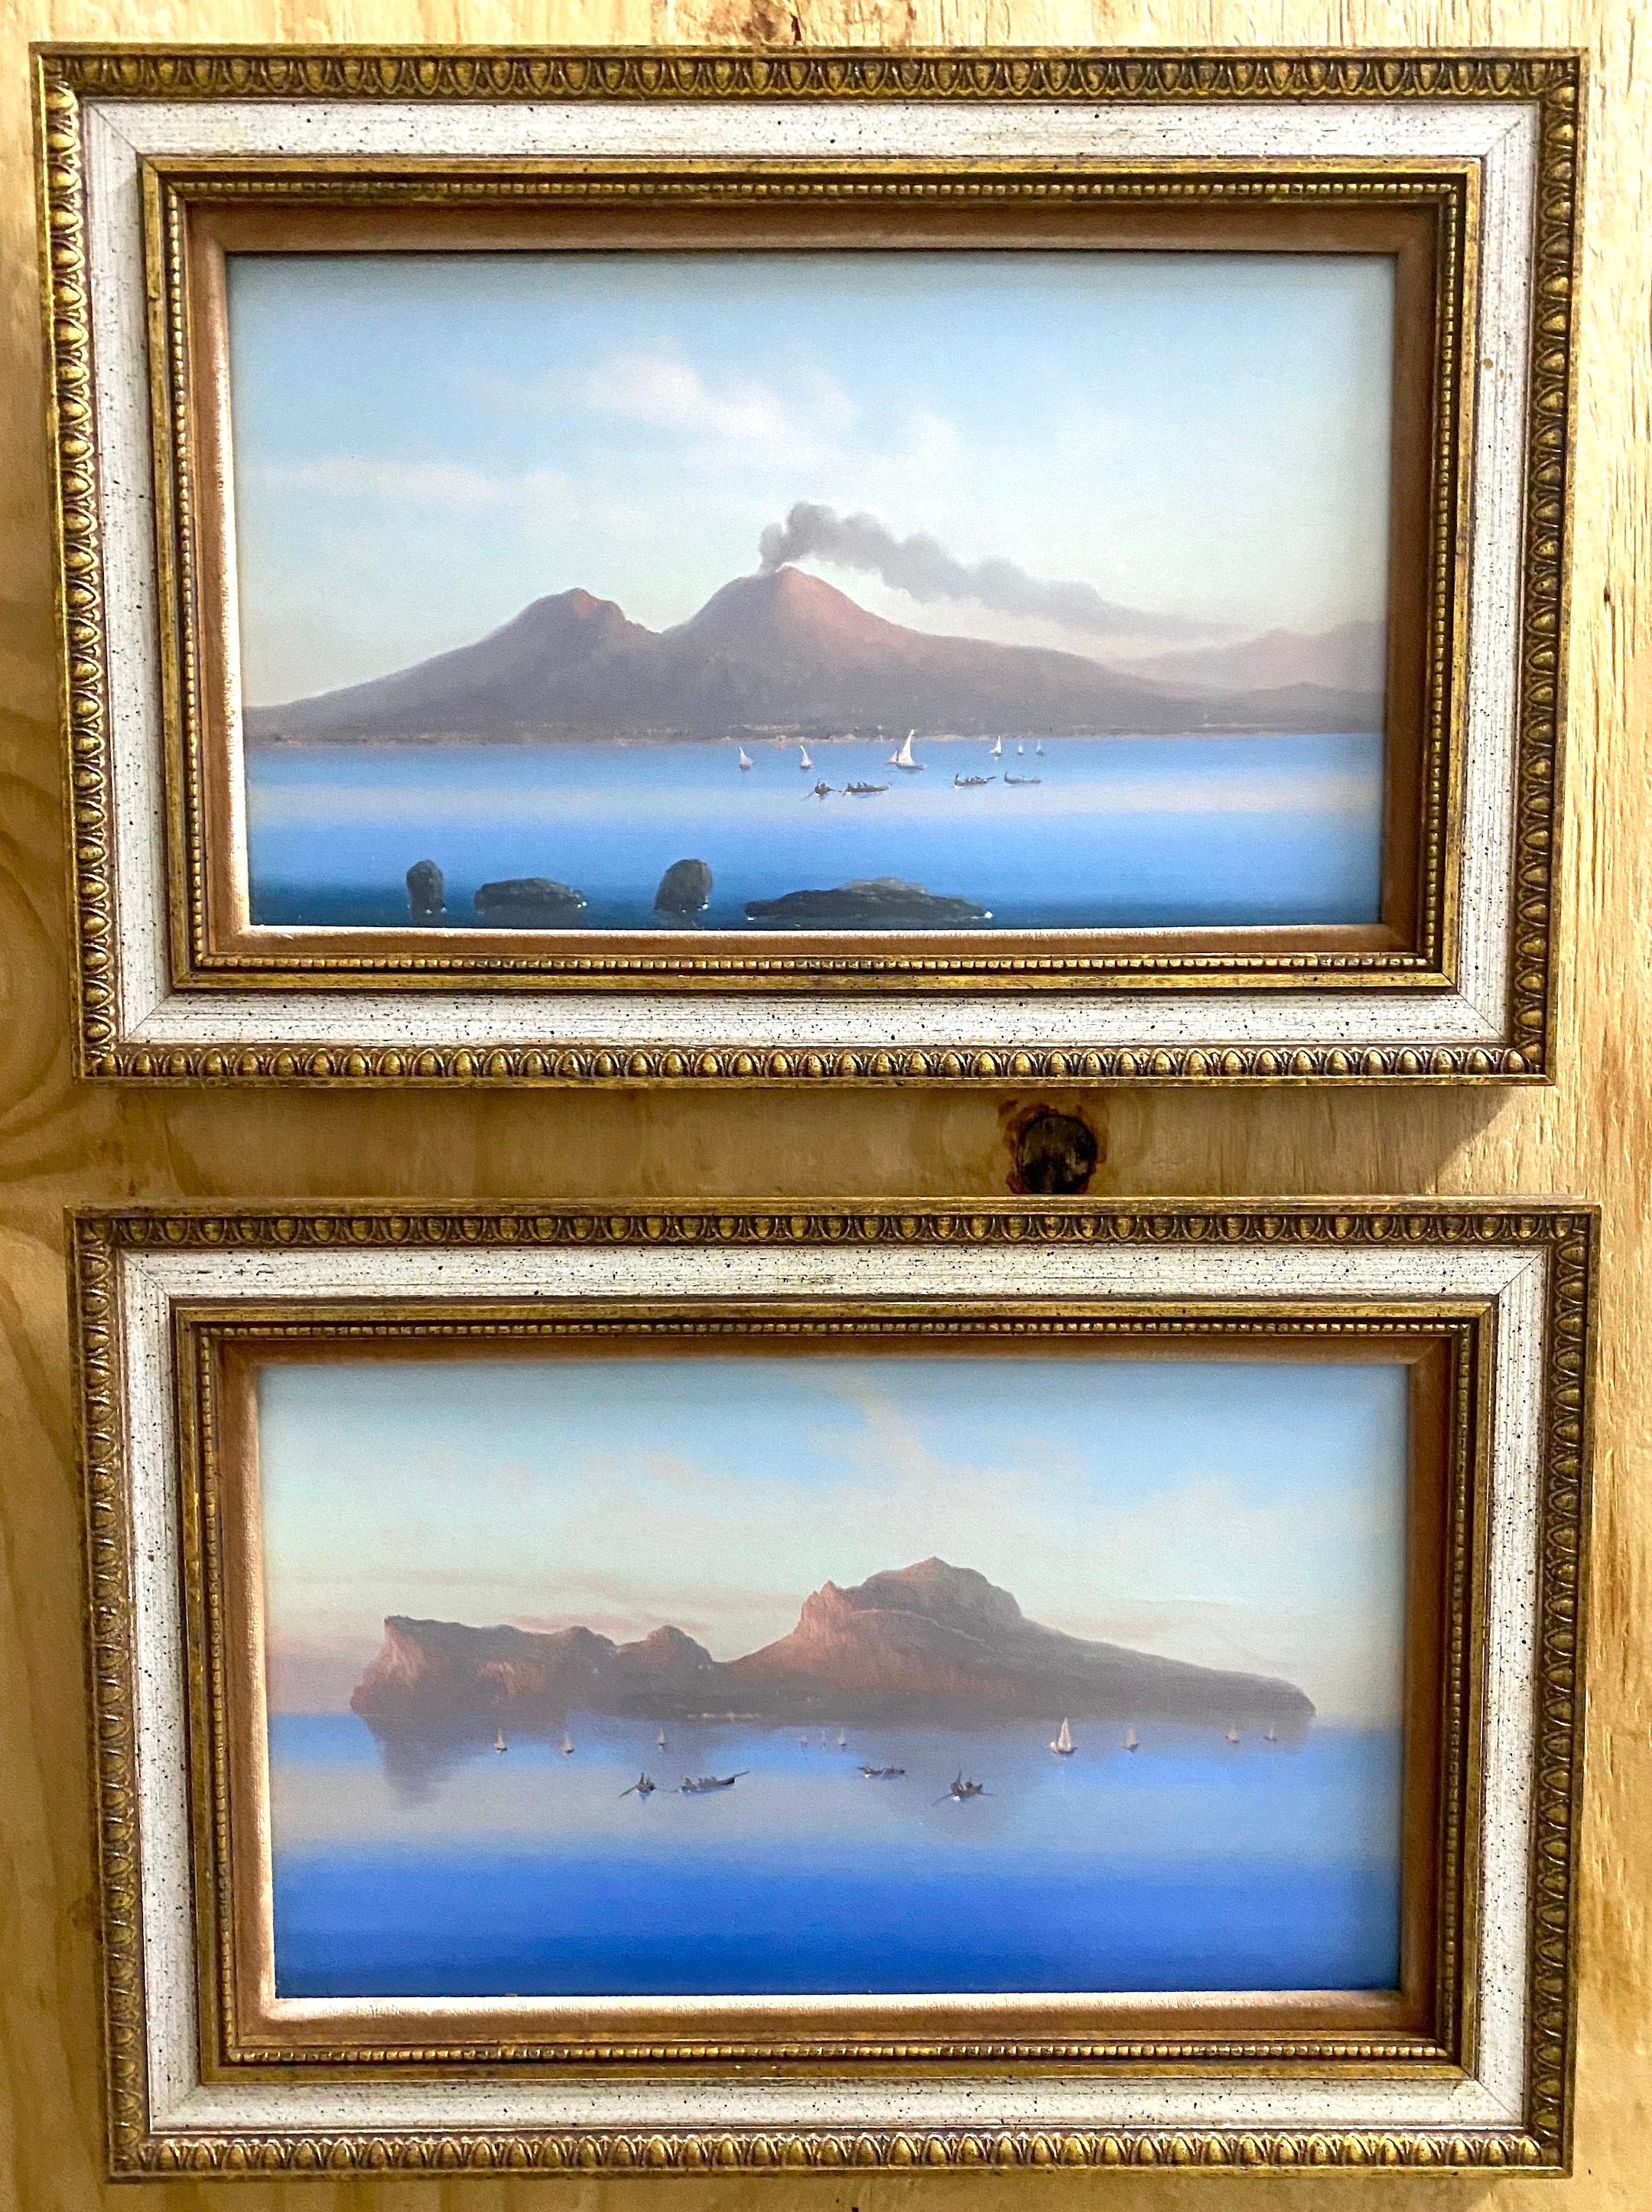 Pair of Neapolitan Grand Tour Gouaches Naples Bay & Mount Vesuvius- Smaller
Italy, Circa 1850s

View these enchanting vistas of 19th-century Italy with this captivating Pair of Neapolitan Grand Tour Paintings, originating from the 1850s. The